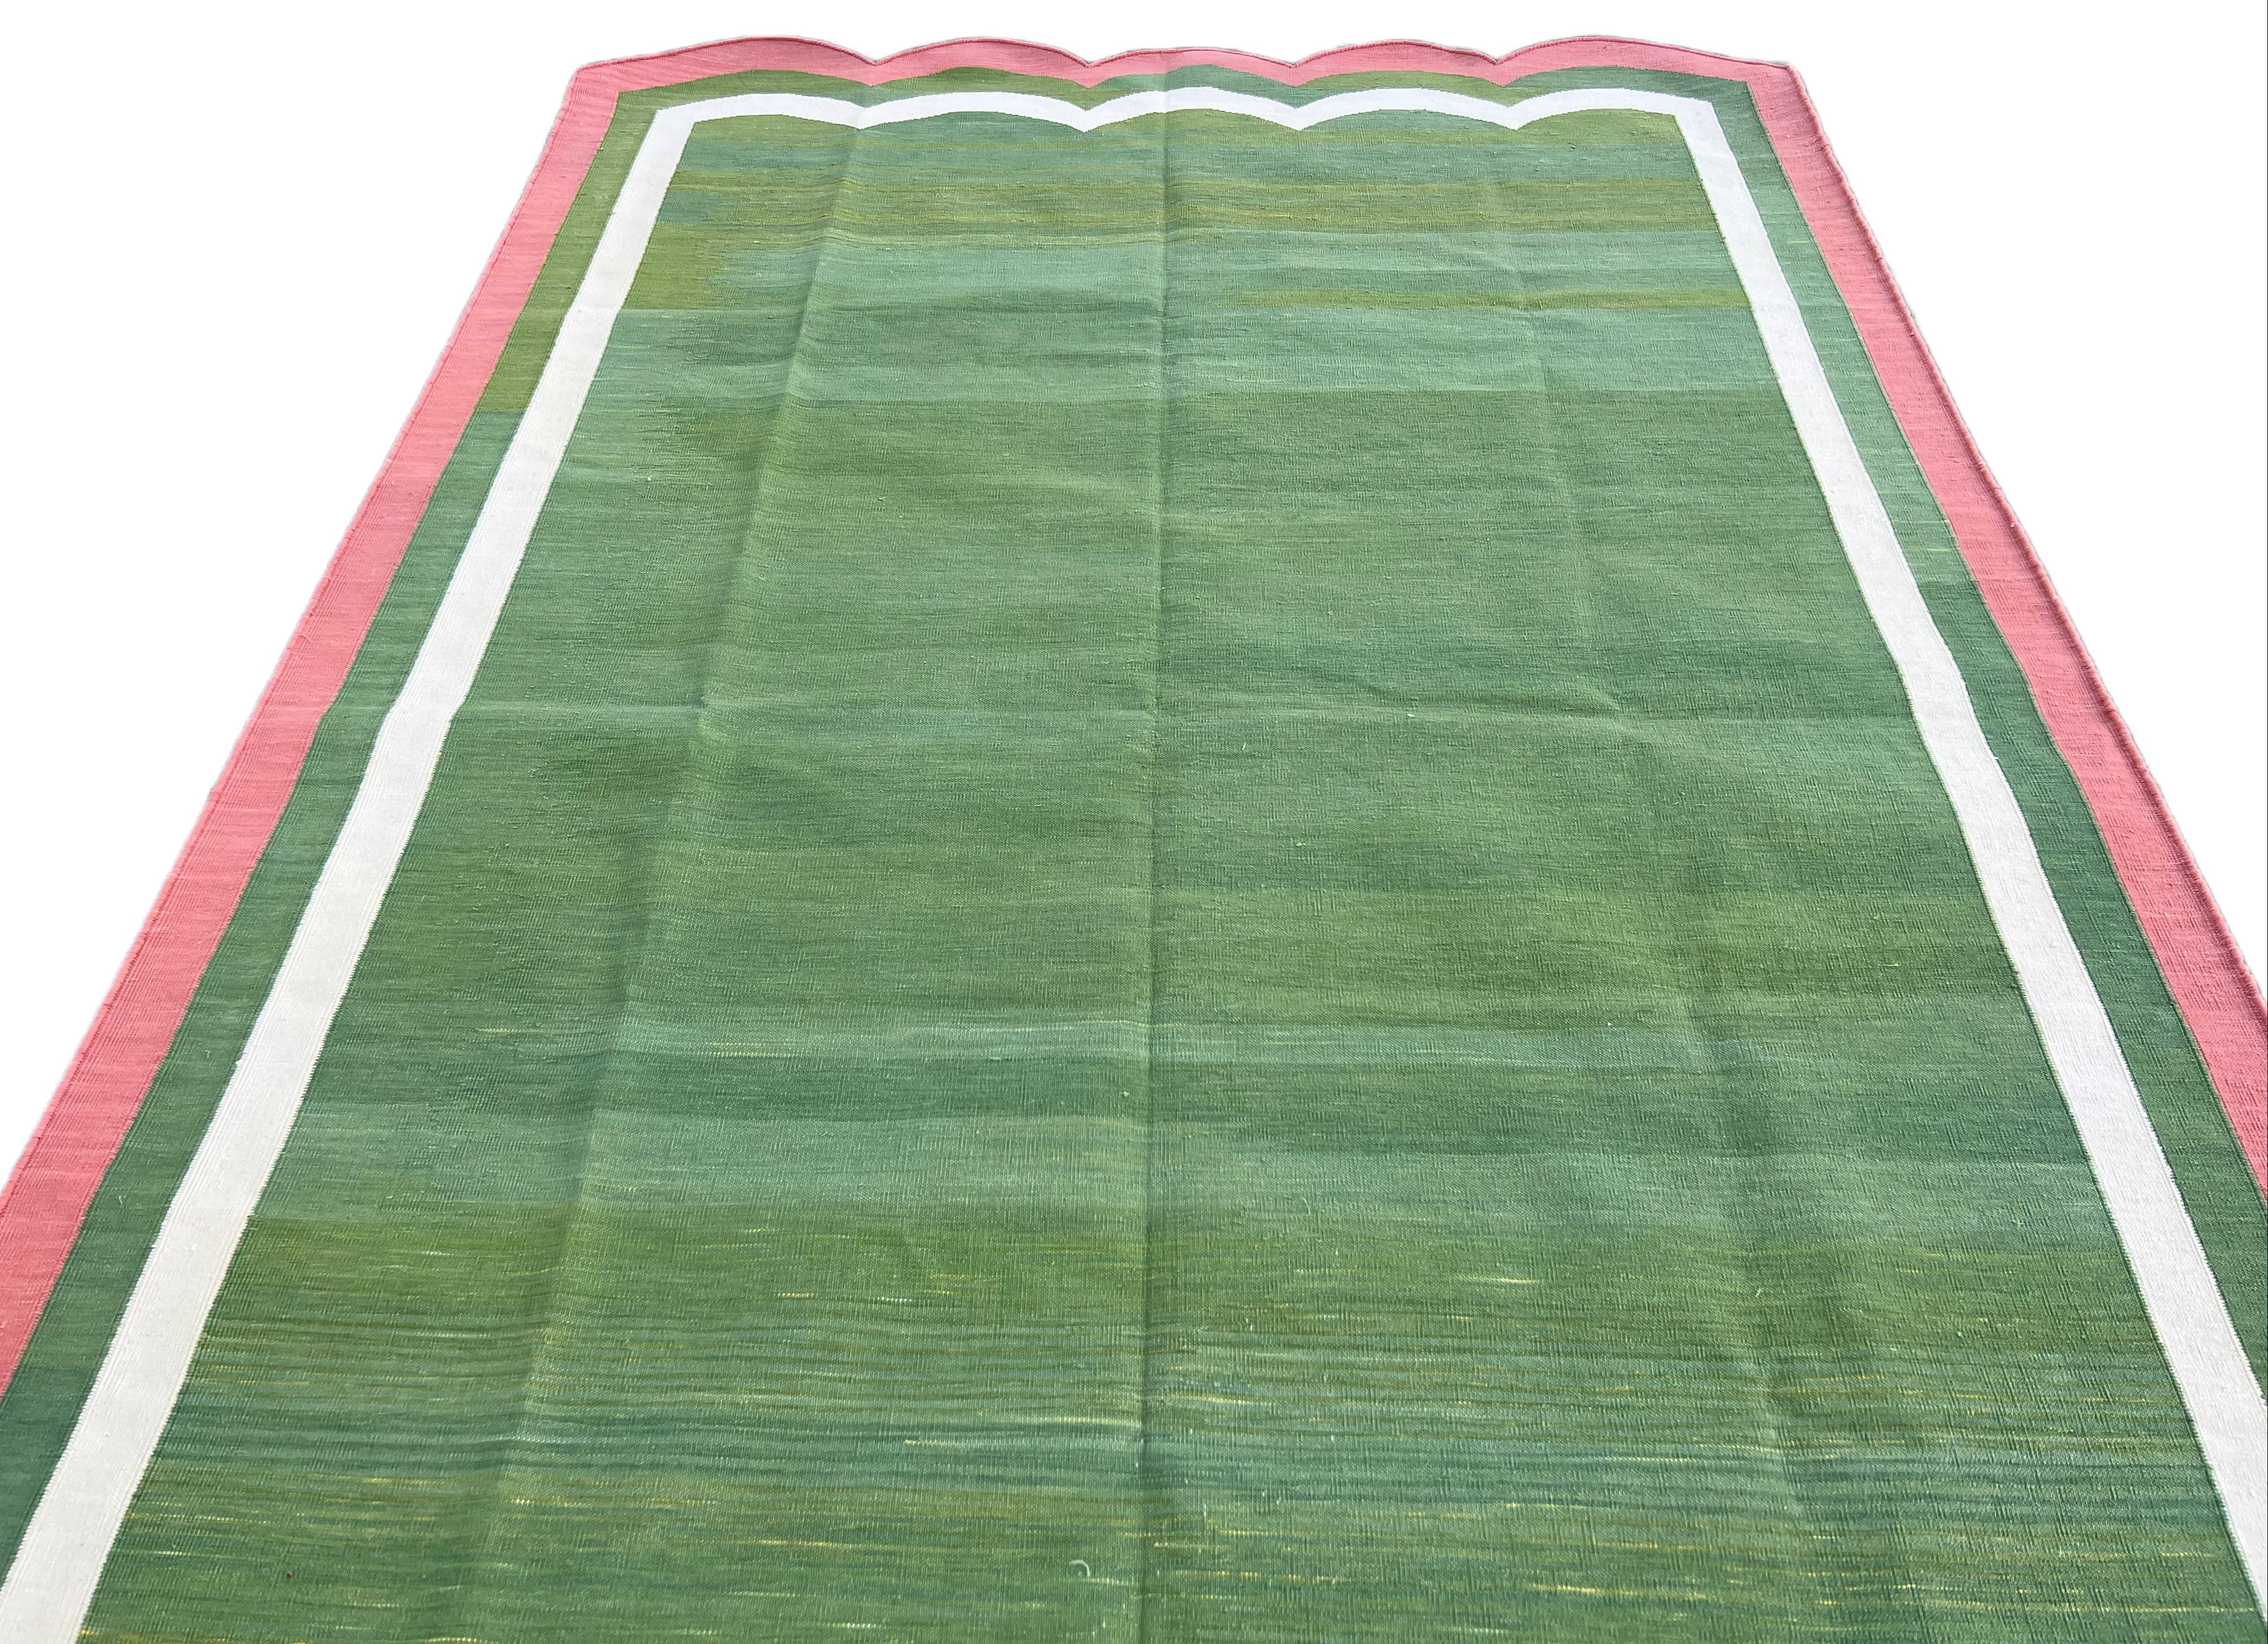 Contemporary Handmade Cotton Area Flat Weave Rug, 5x8 Green And Pink Scalloped Kilim Dhurrie For Sale